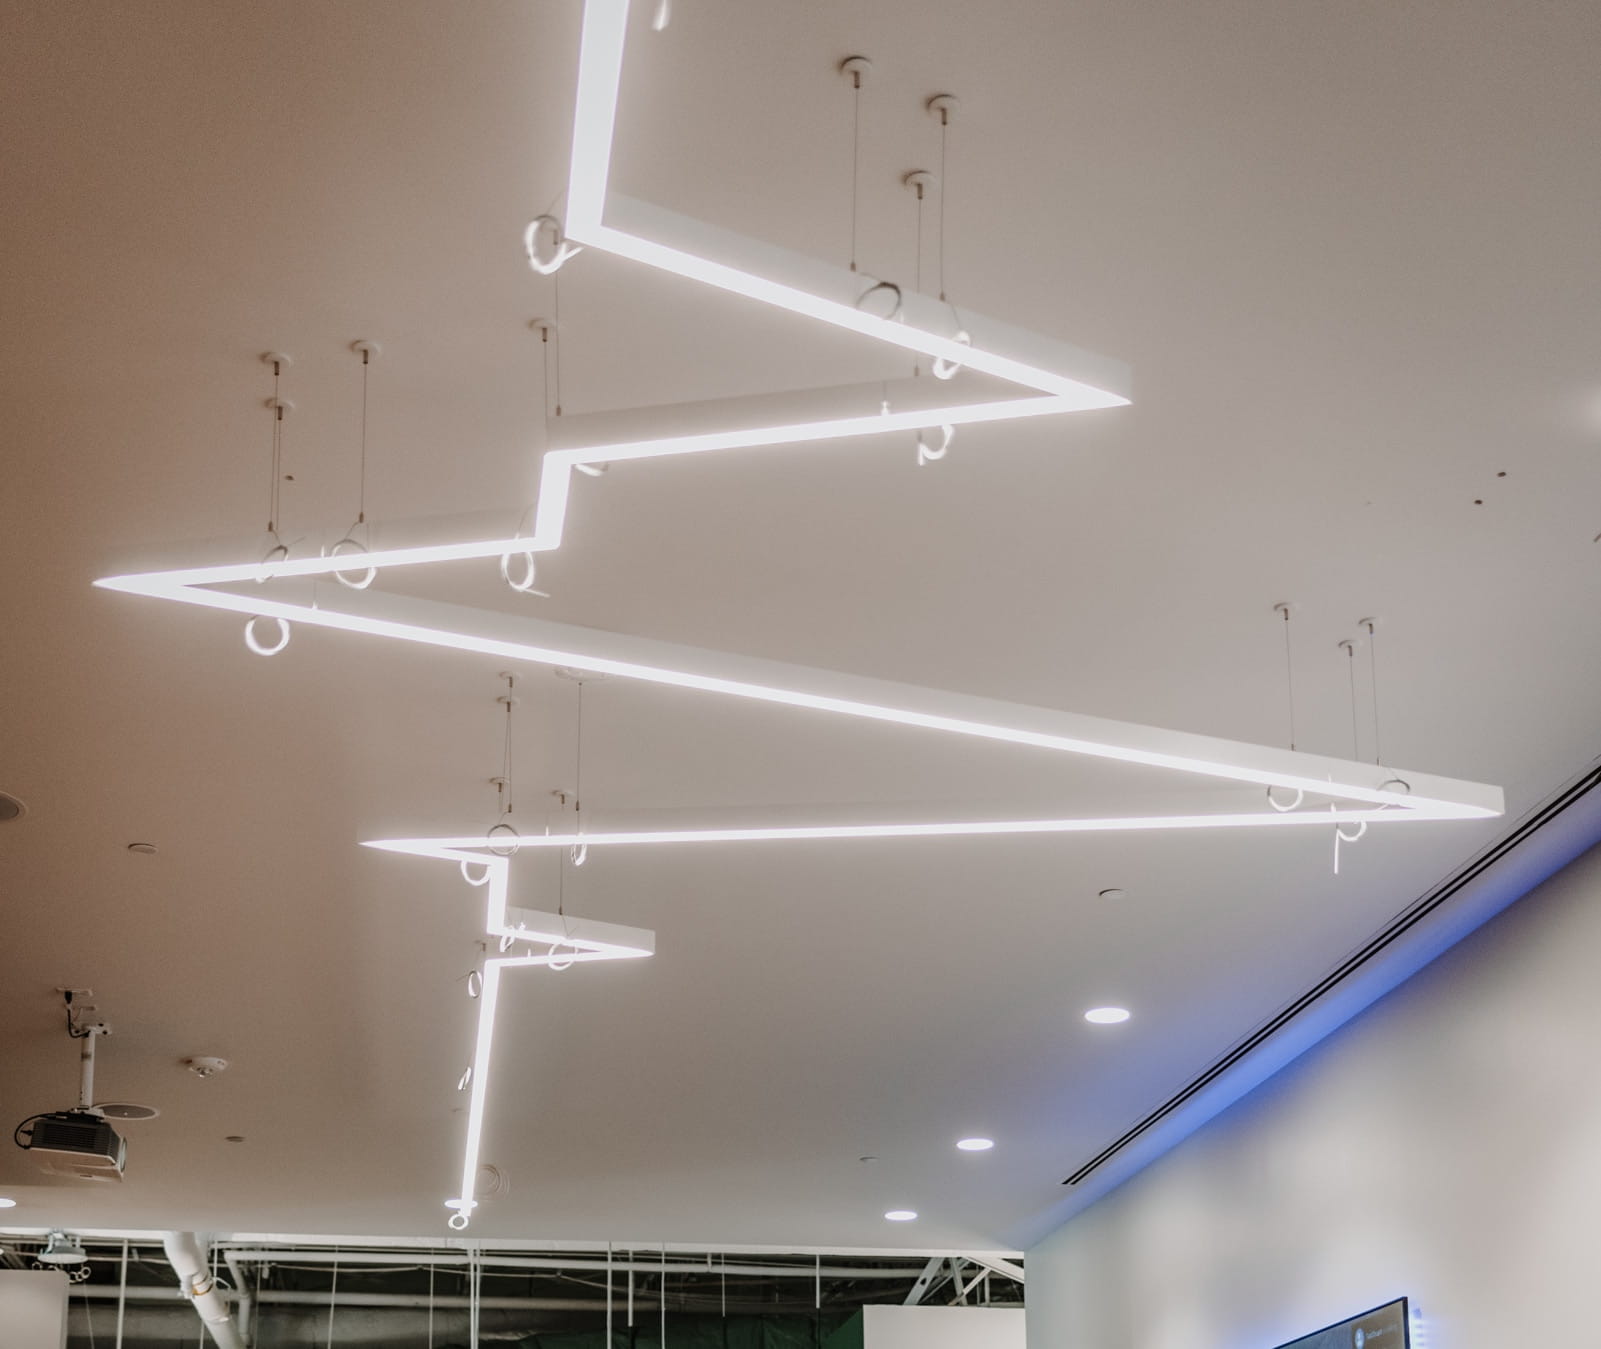 A EKG-shaped light fixture on the ceiling of an office.